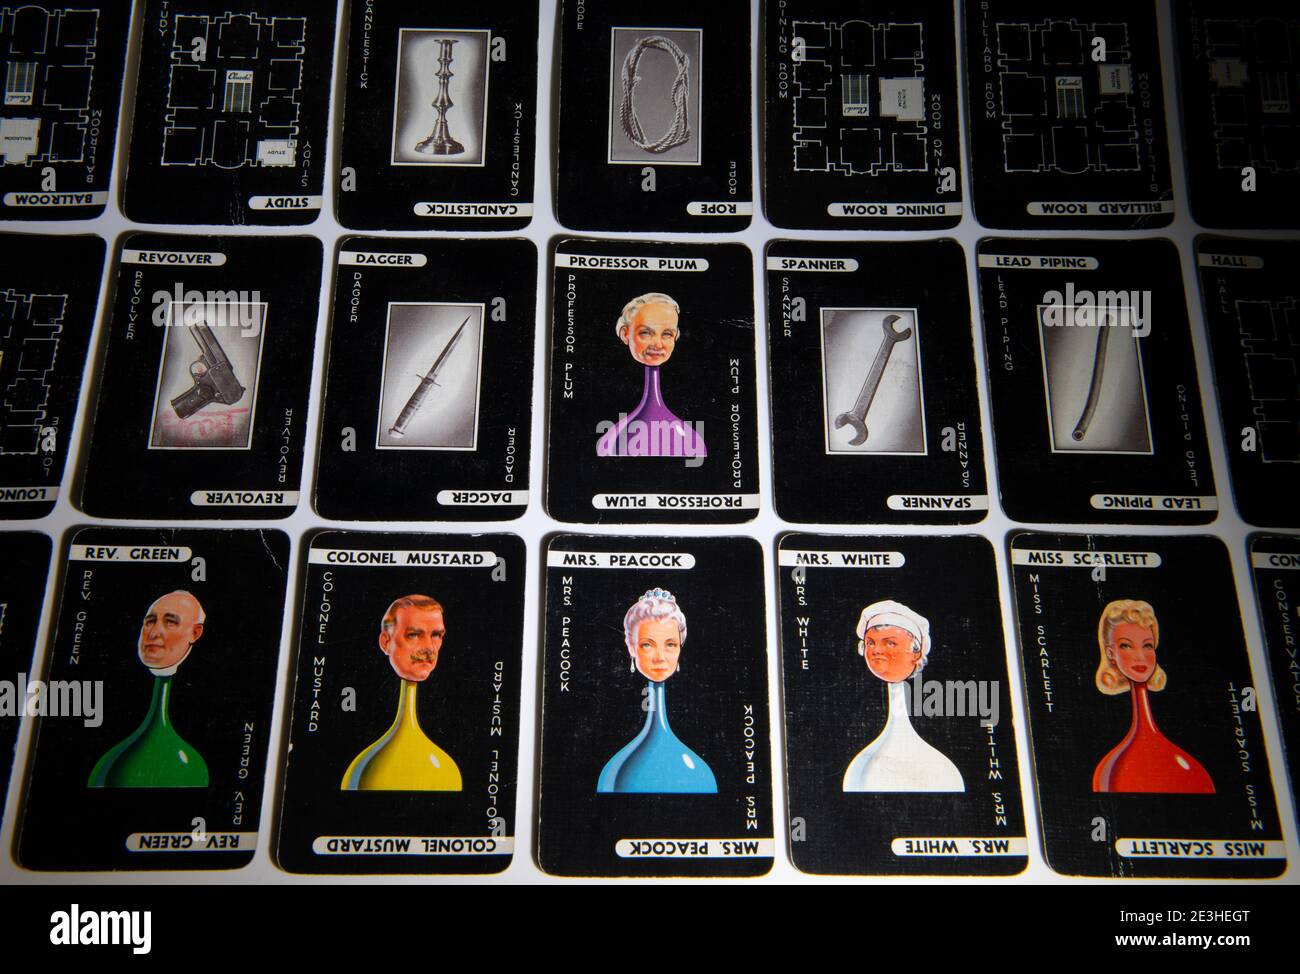 Complete set of Cluedo detective game cards from a 1949 version of the board game Stock Photo